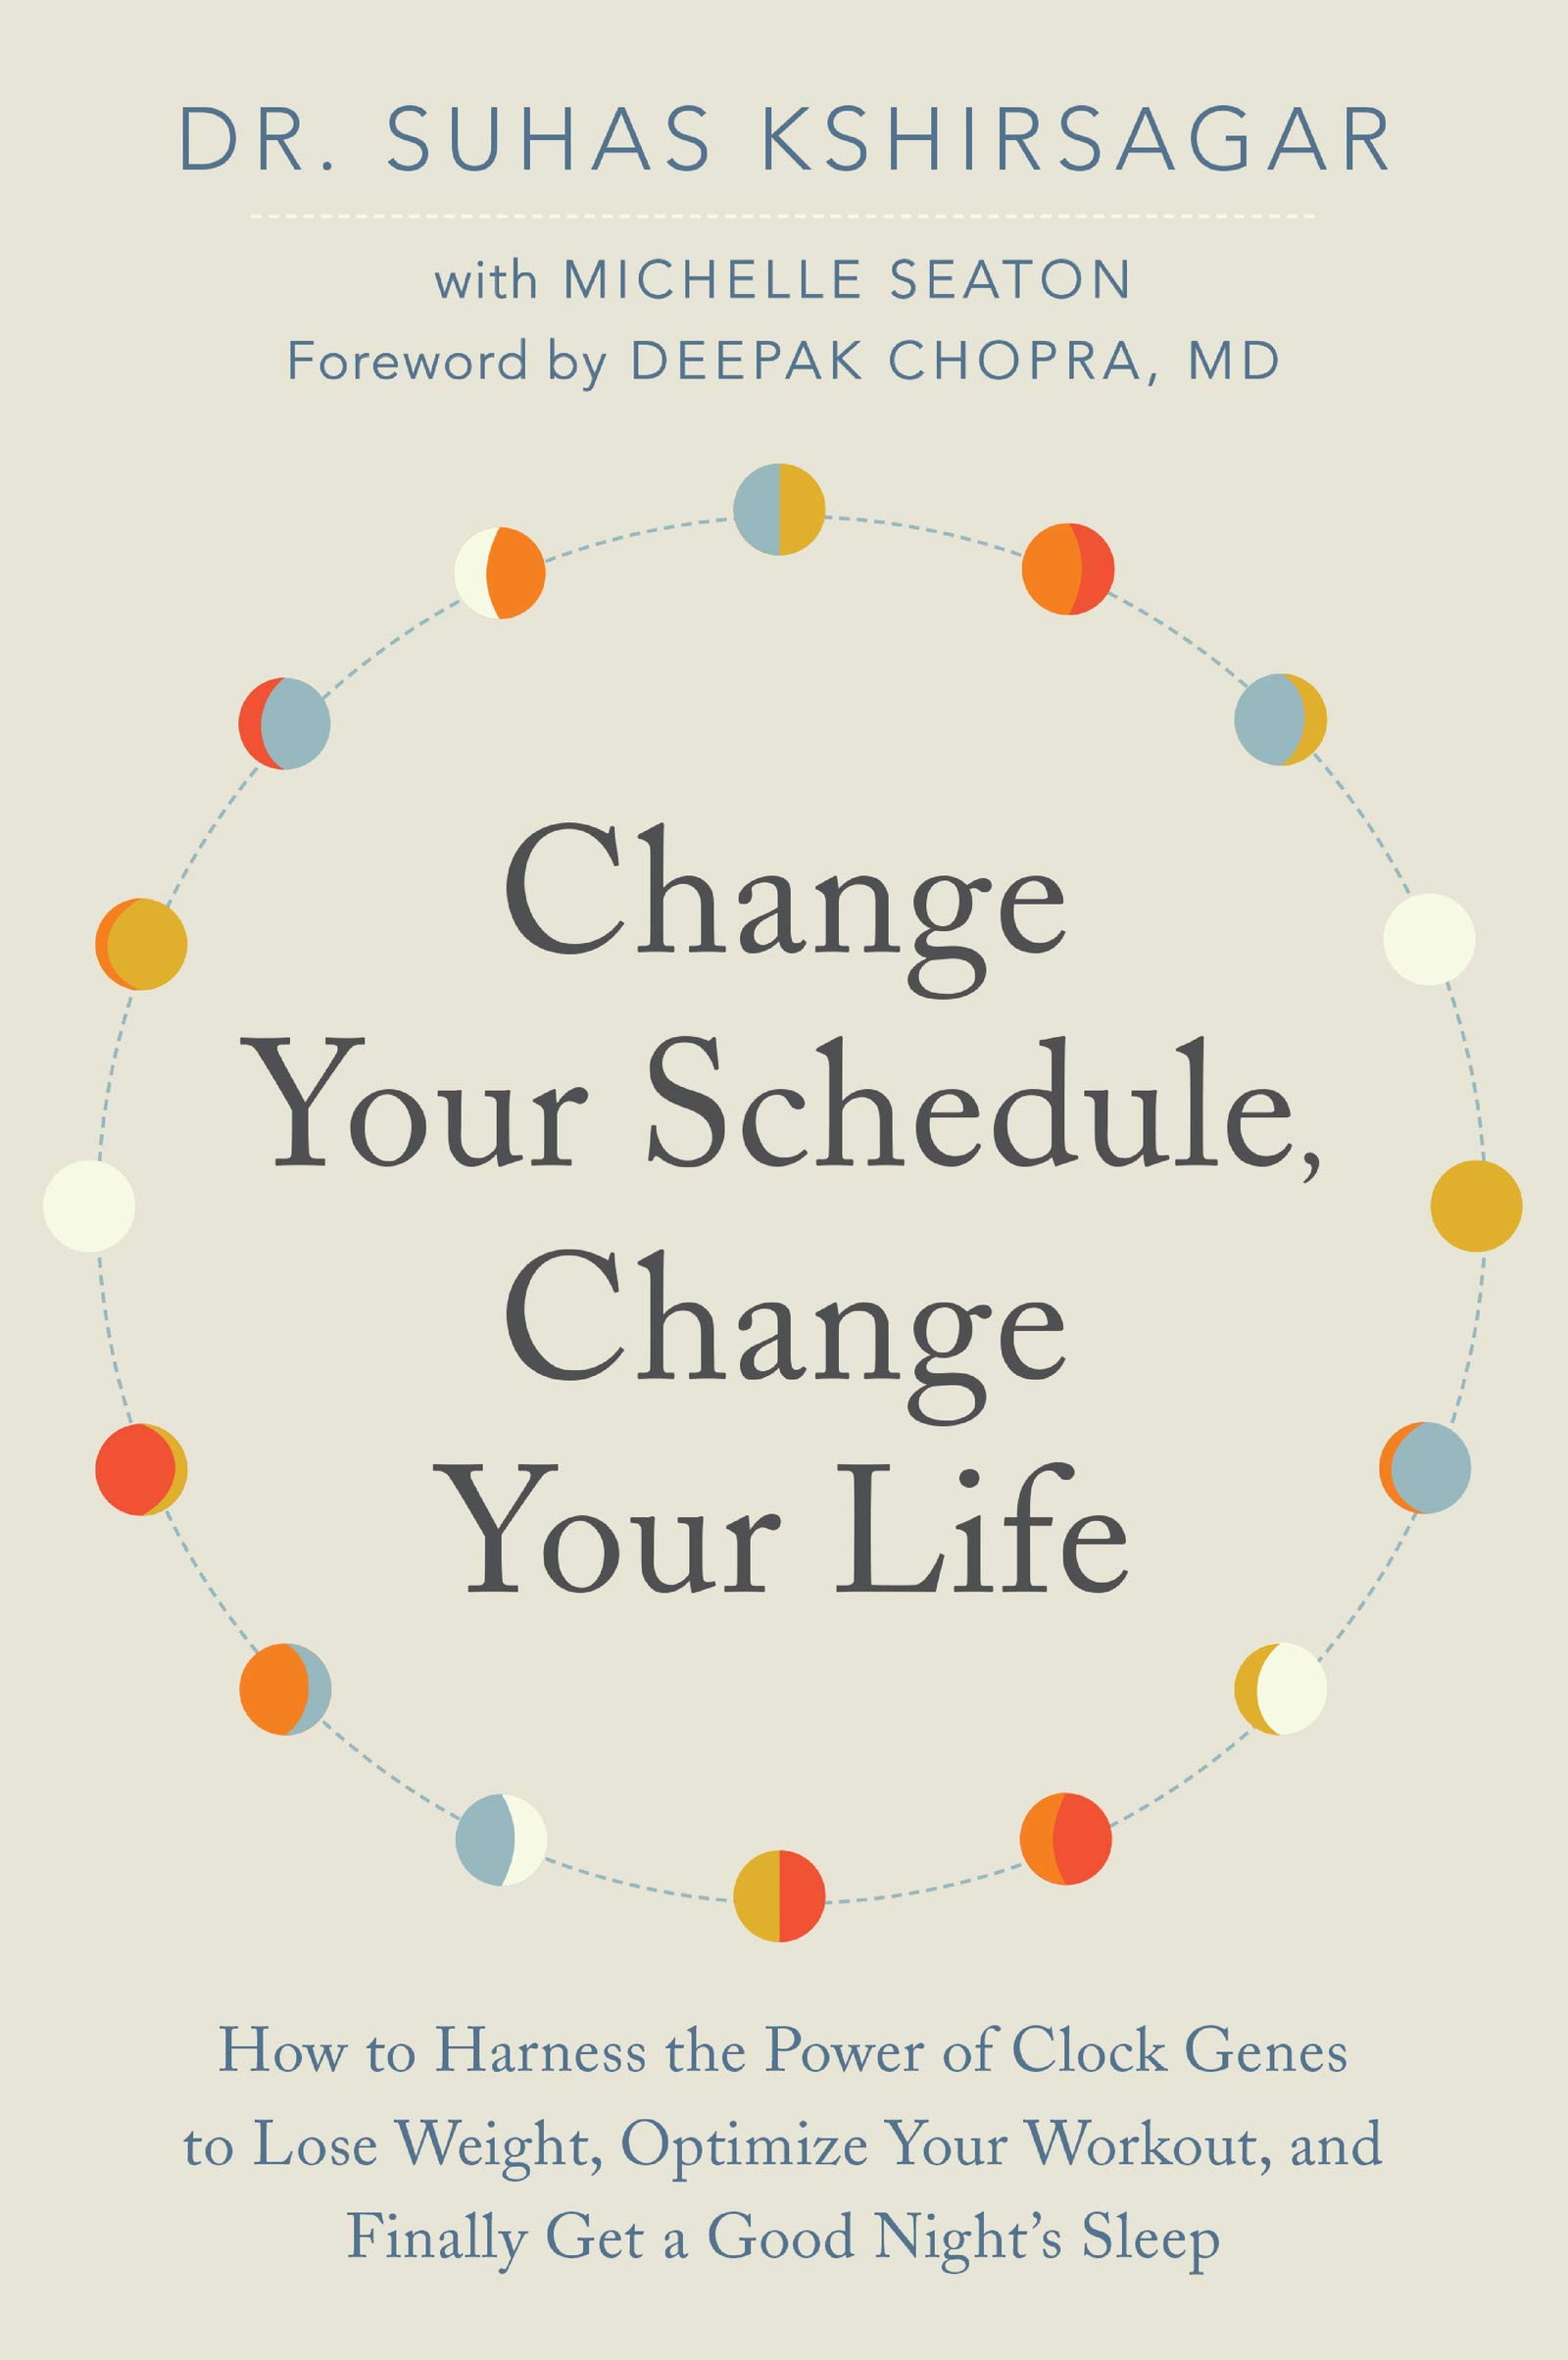 Change Your Schedule, Change Your Life: How to Harness the Power of Clock Genes to Lose Weight, Optimize Your Workout, and Finally Get a Good Night's Sleep (How to Harness the Pro)